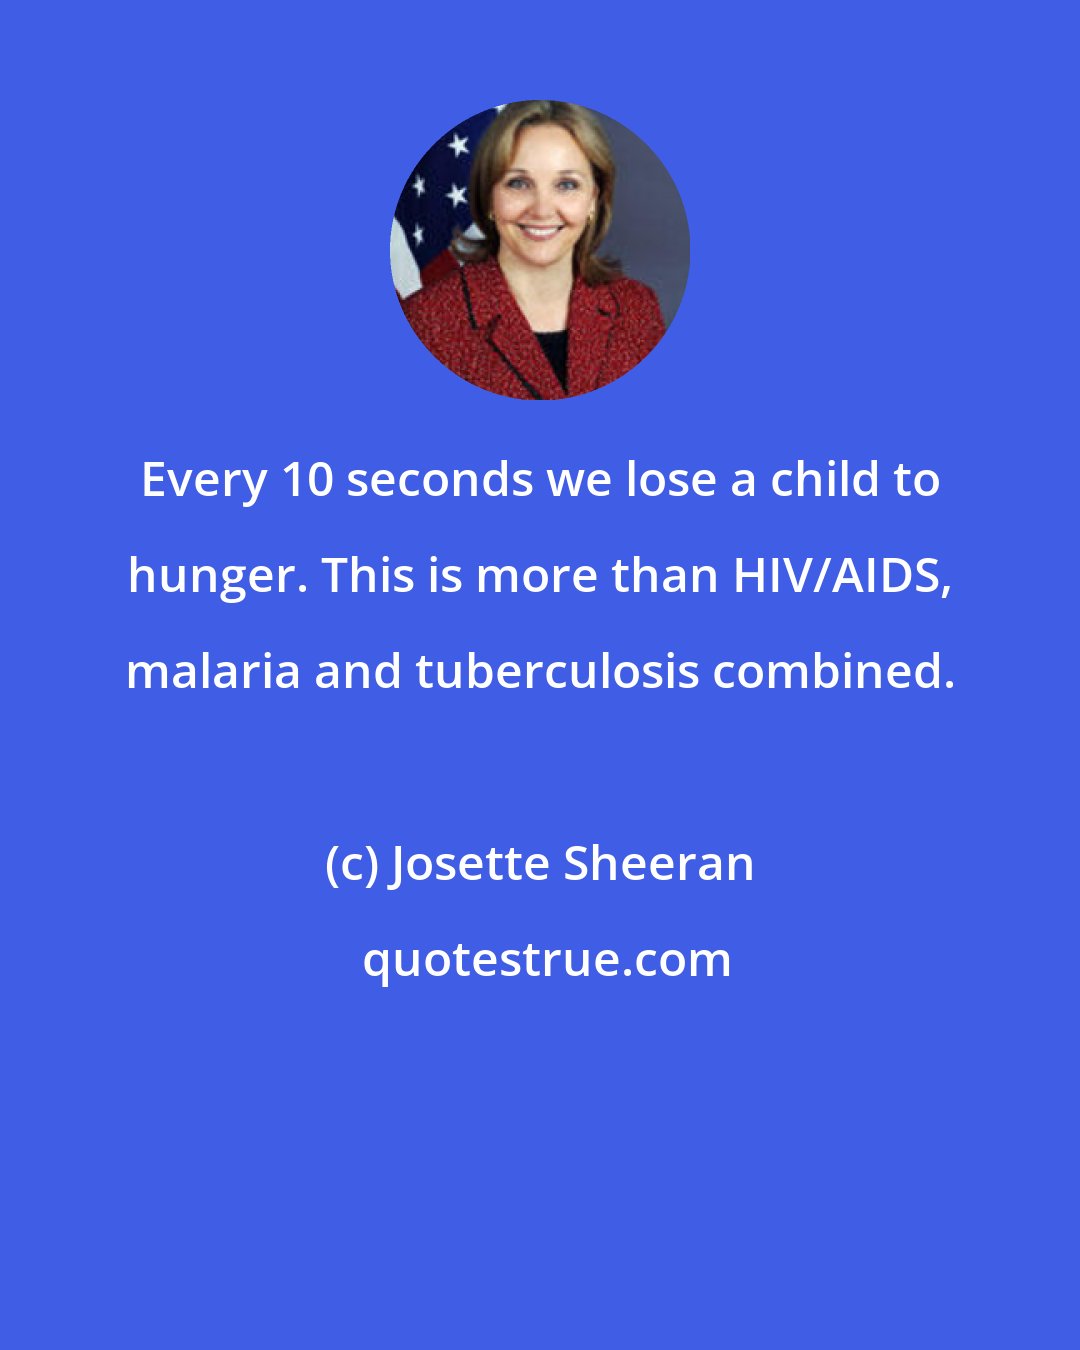 Josette Sheeran: Every 10 seconds we lose a child to hunger. This is more than HIV/AIDS, malaria and tuberculosis combined.